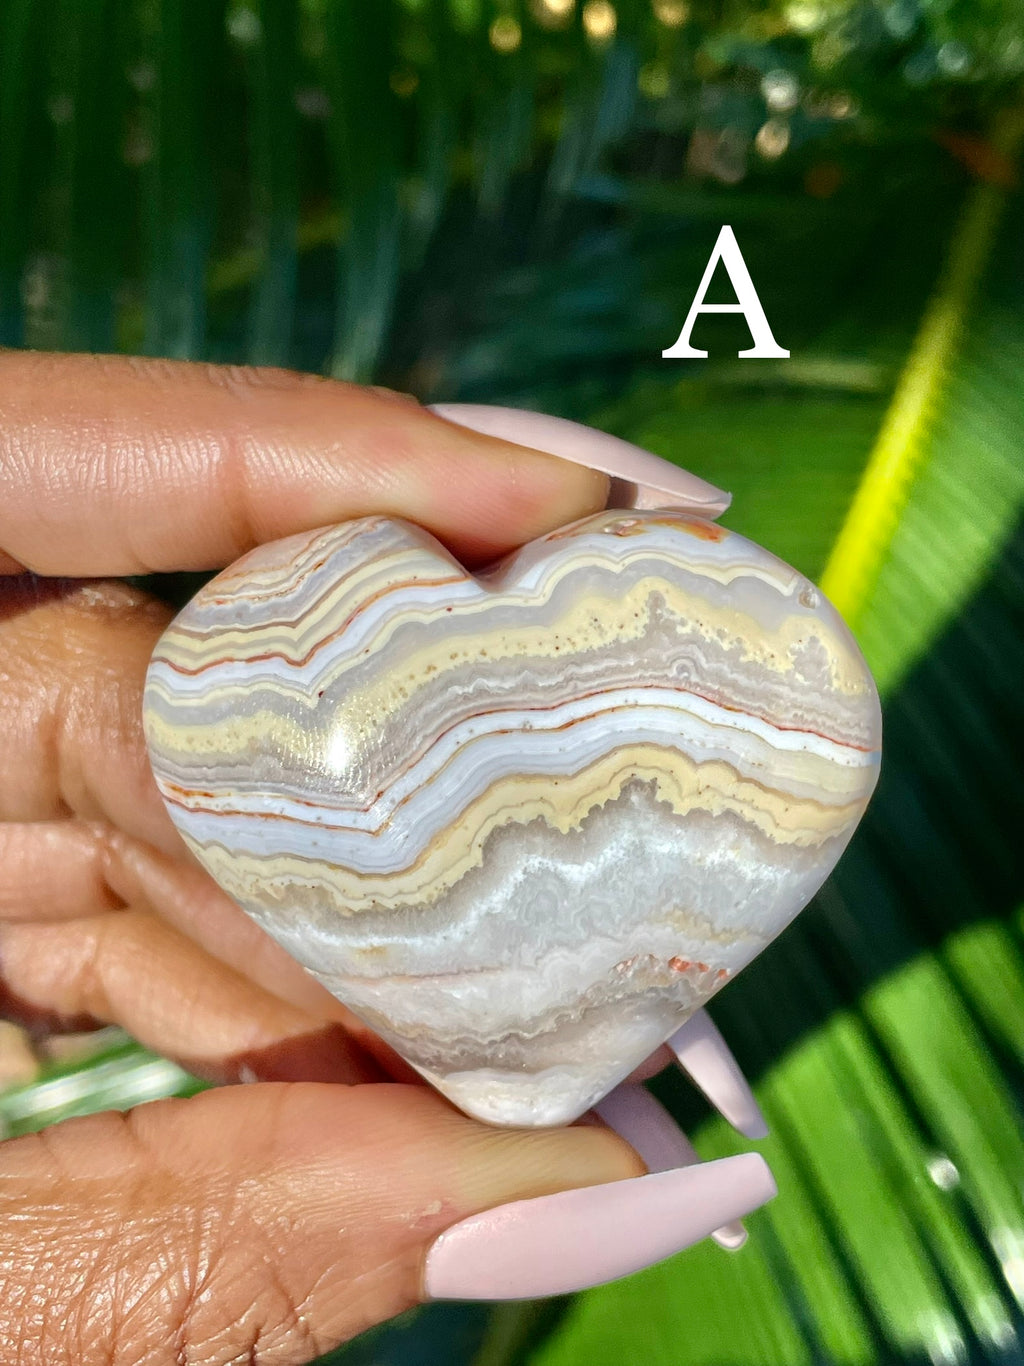 Crazy Lace Agate Hearts